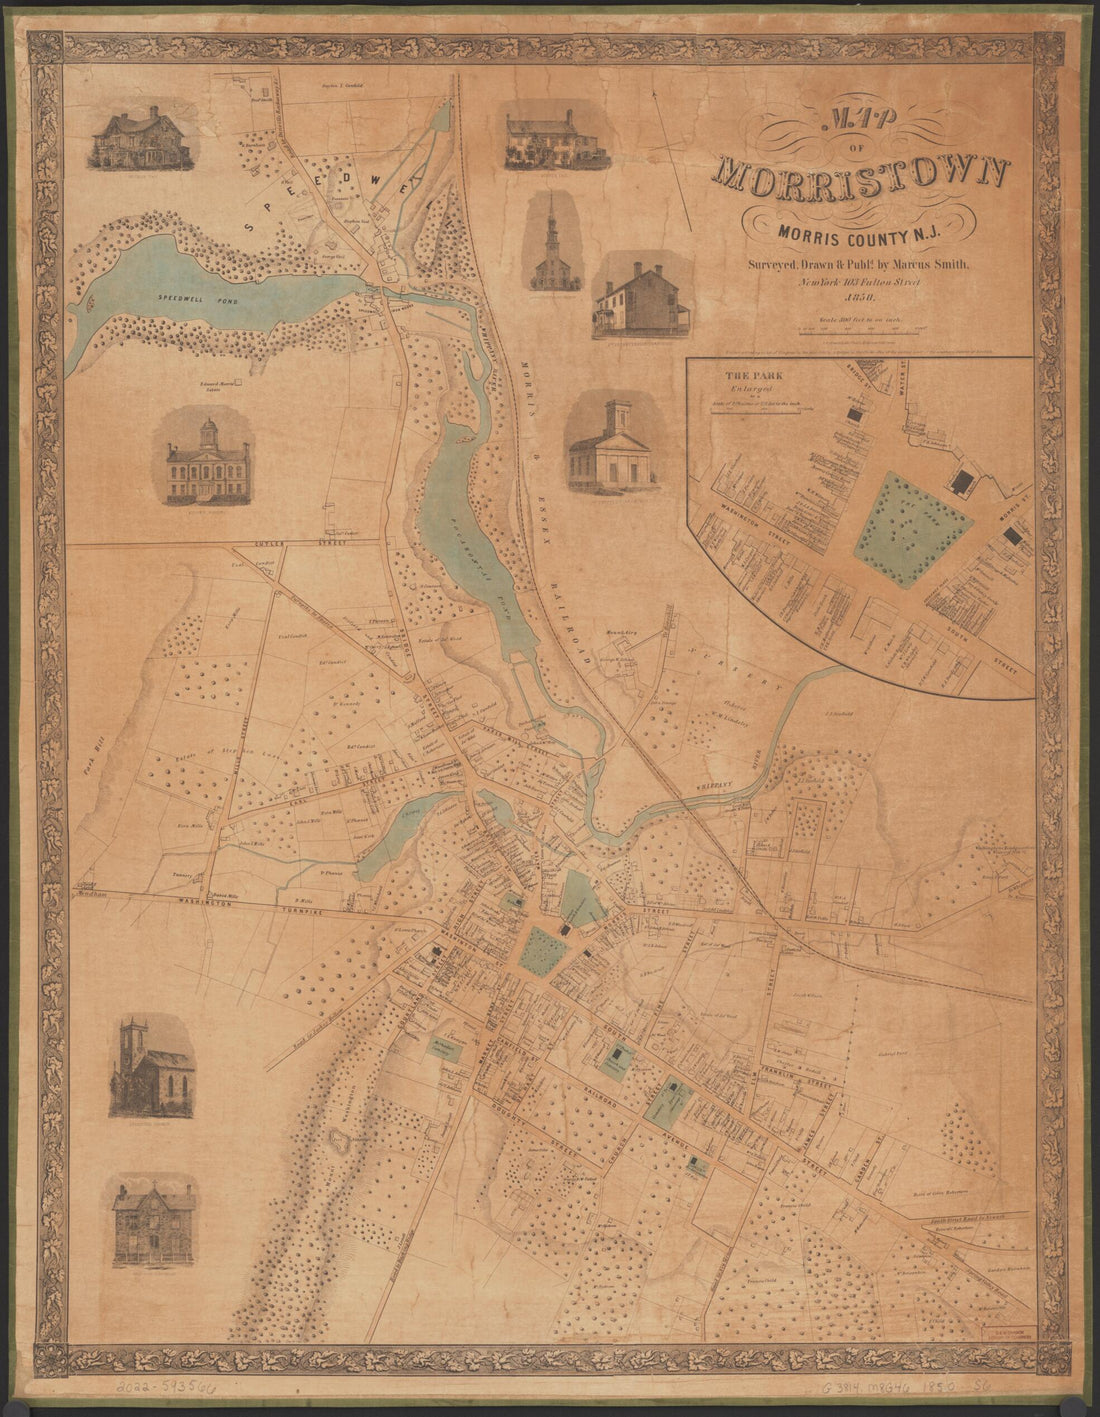 This old map of Map of Morristown, Morris County, New Jersey from 1850 was created by Marcus Smith in 1850